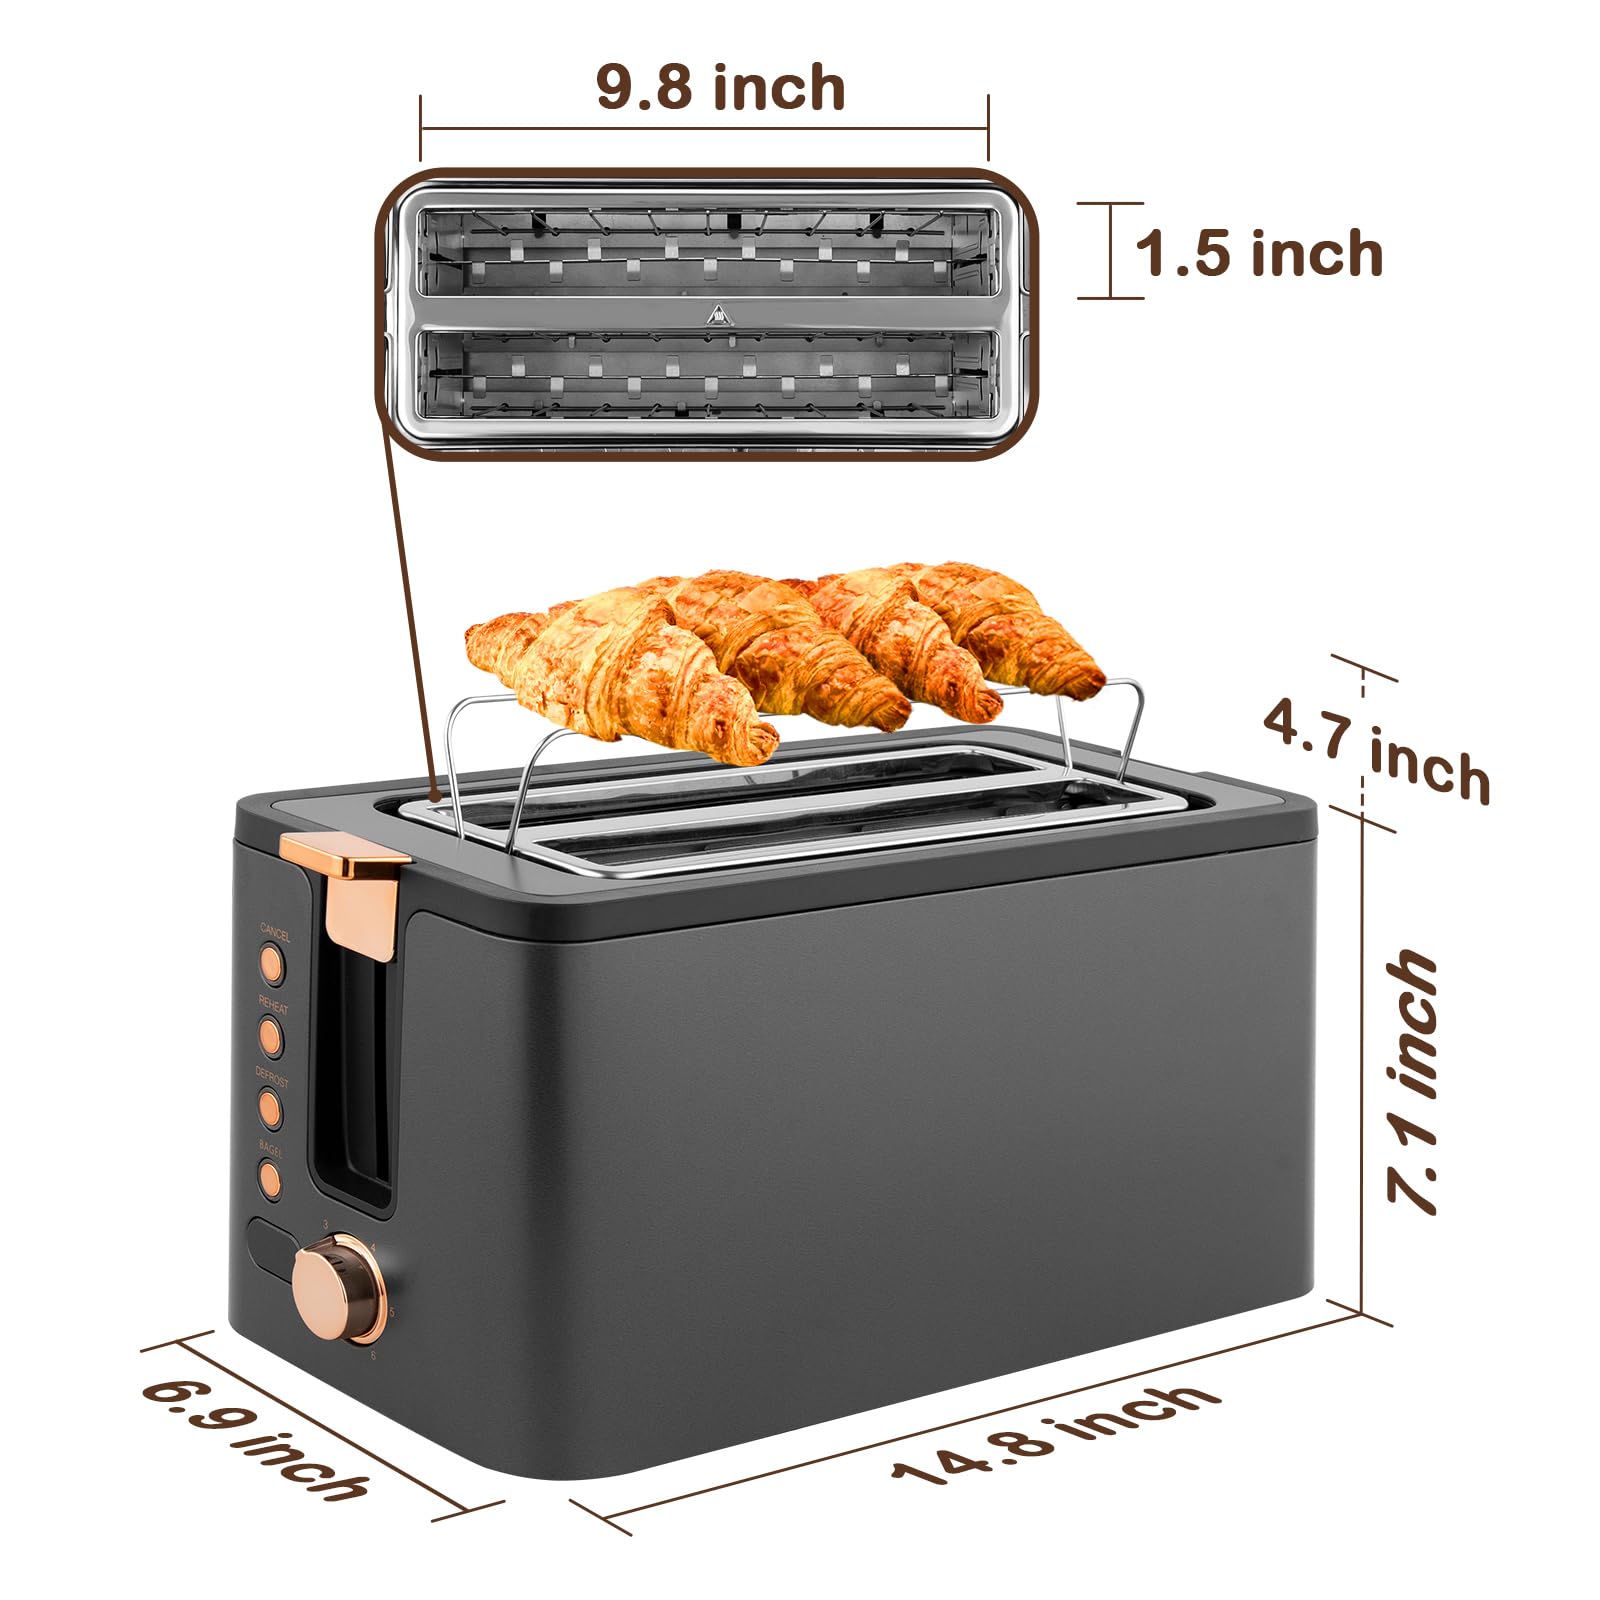 Mecity 4 Slice Toaster, Long Slot Toaster With Countdown Timer, Bagel / Defrost / Reheat / Cancel Functions,Warming Rack, removable Crumb Tray, 6 Browning Settings, Extra Wide Long Slots, Stainless Steel Bread Toaster, 1300 Watts， Grey & Golden